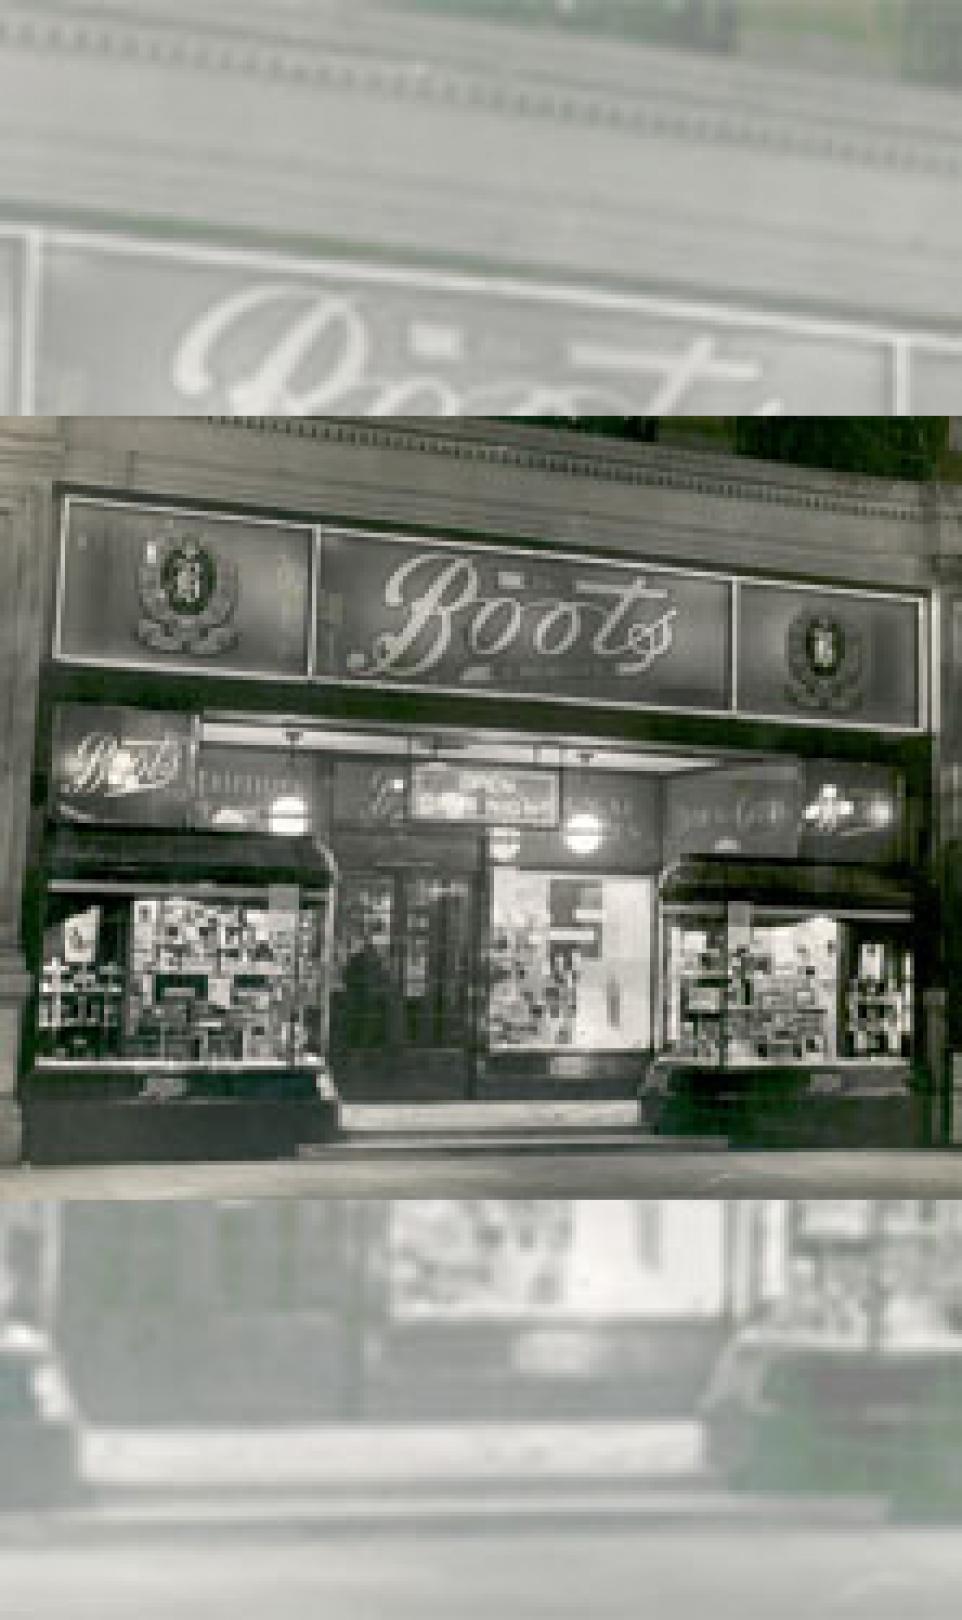 Storefront black and white photograph of the first Boots store in Goose Gate, Nottingham, UK